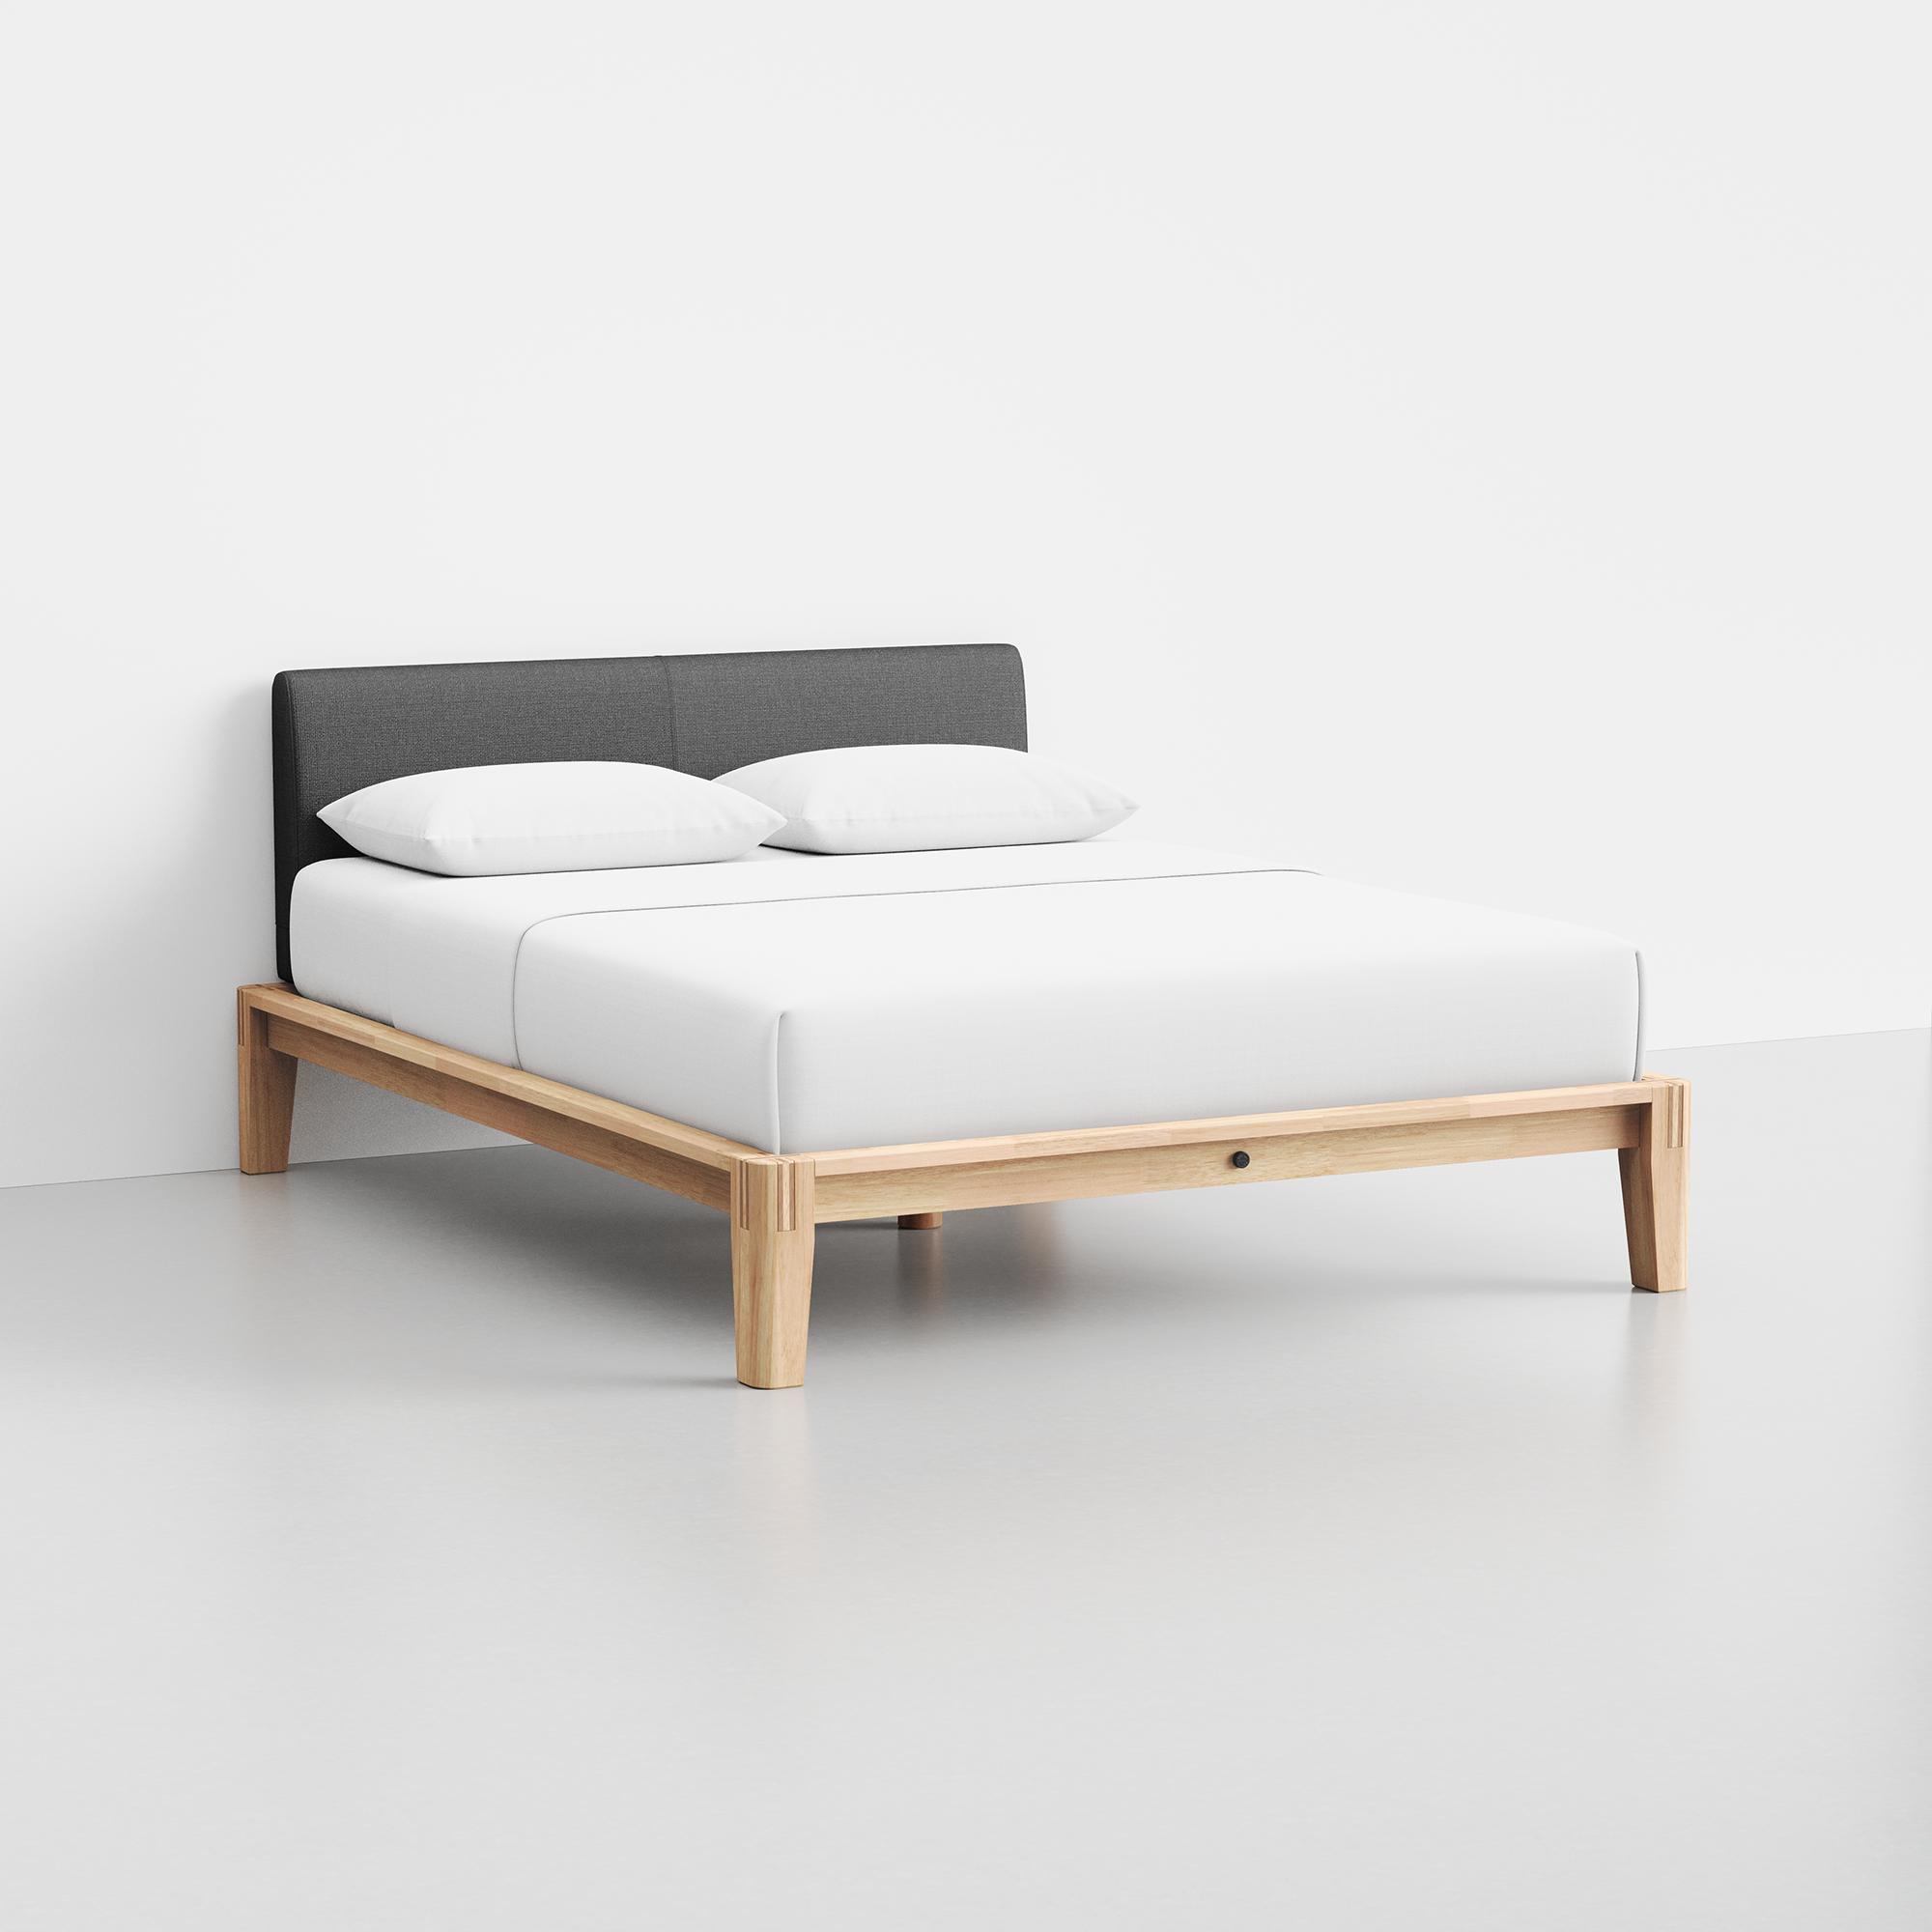 The Bed (Natural / Dark Charcoal) - Render - Angled